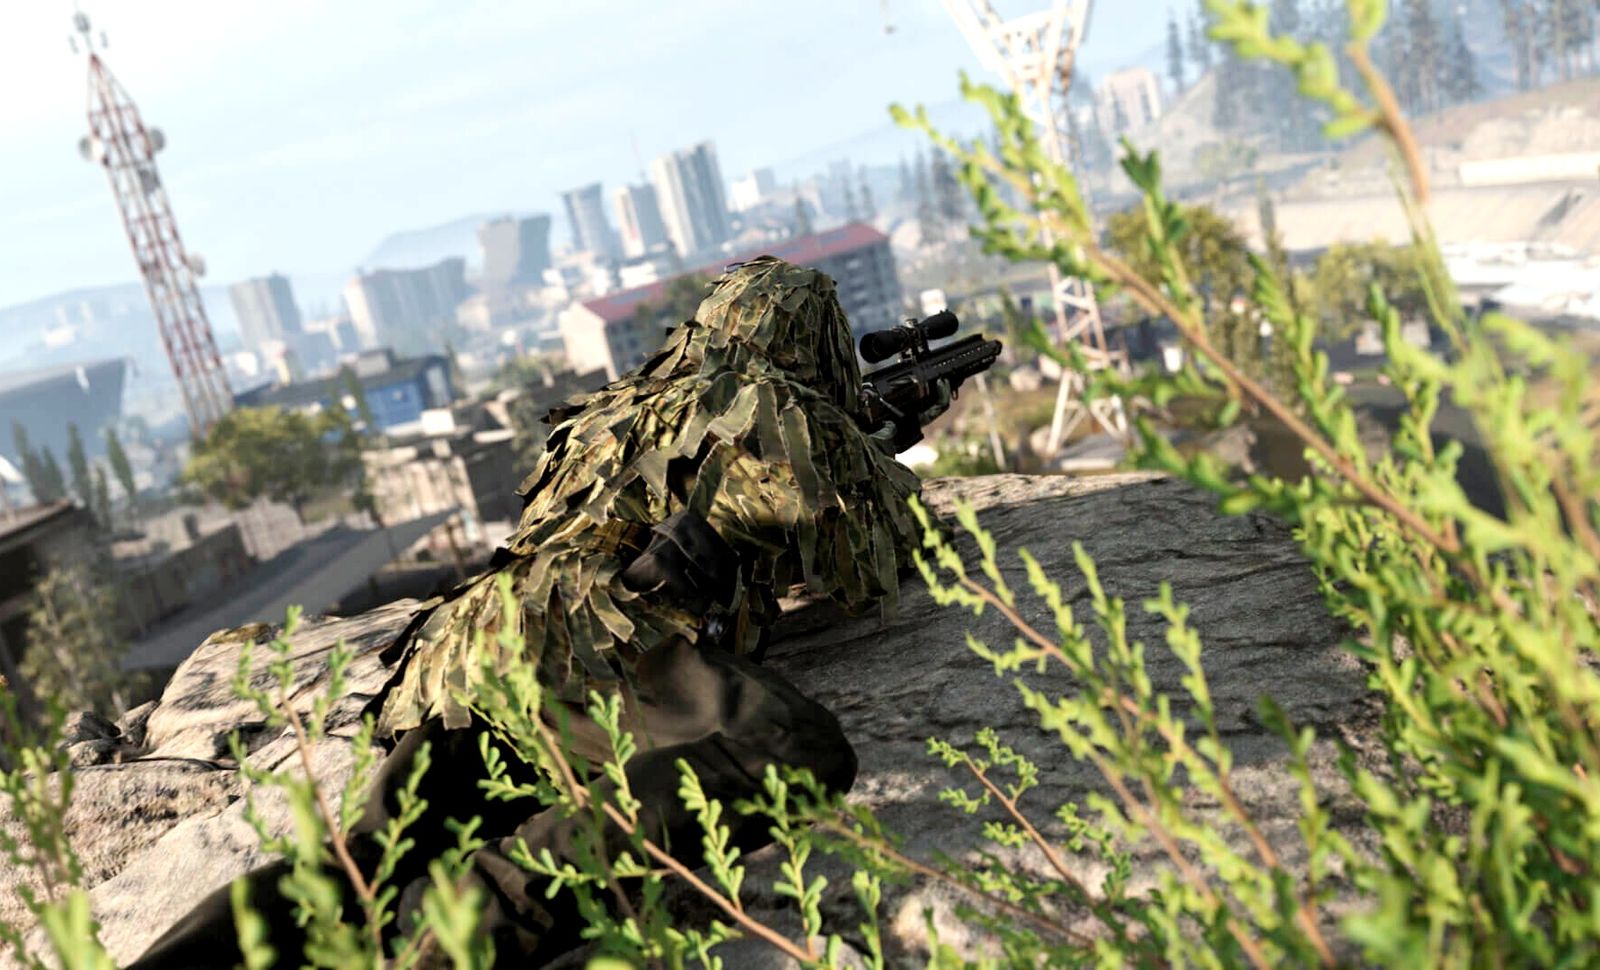 Modern Warfare 3 player laying prone with sniper rifle while wearing ghillie suit